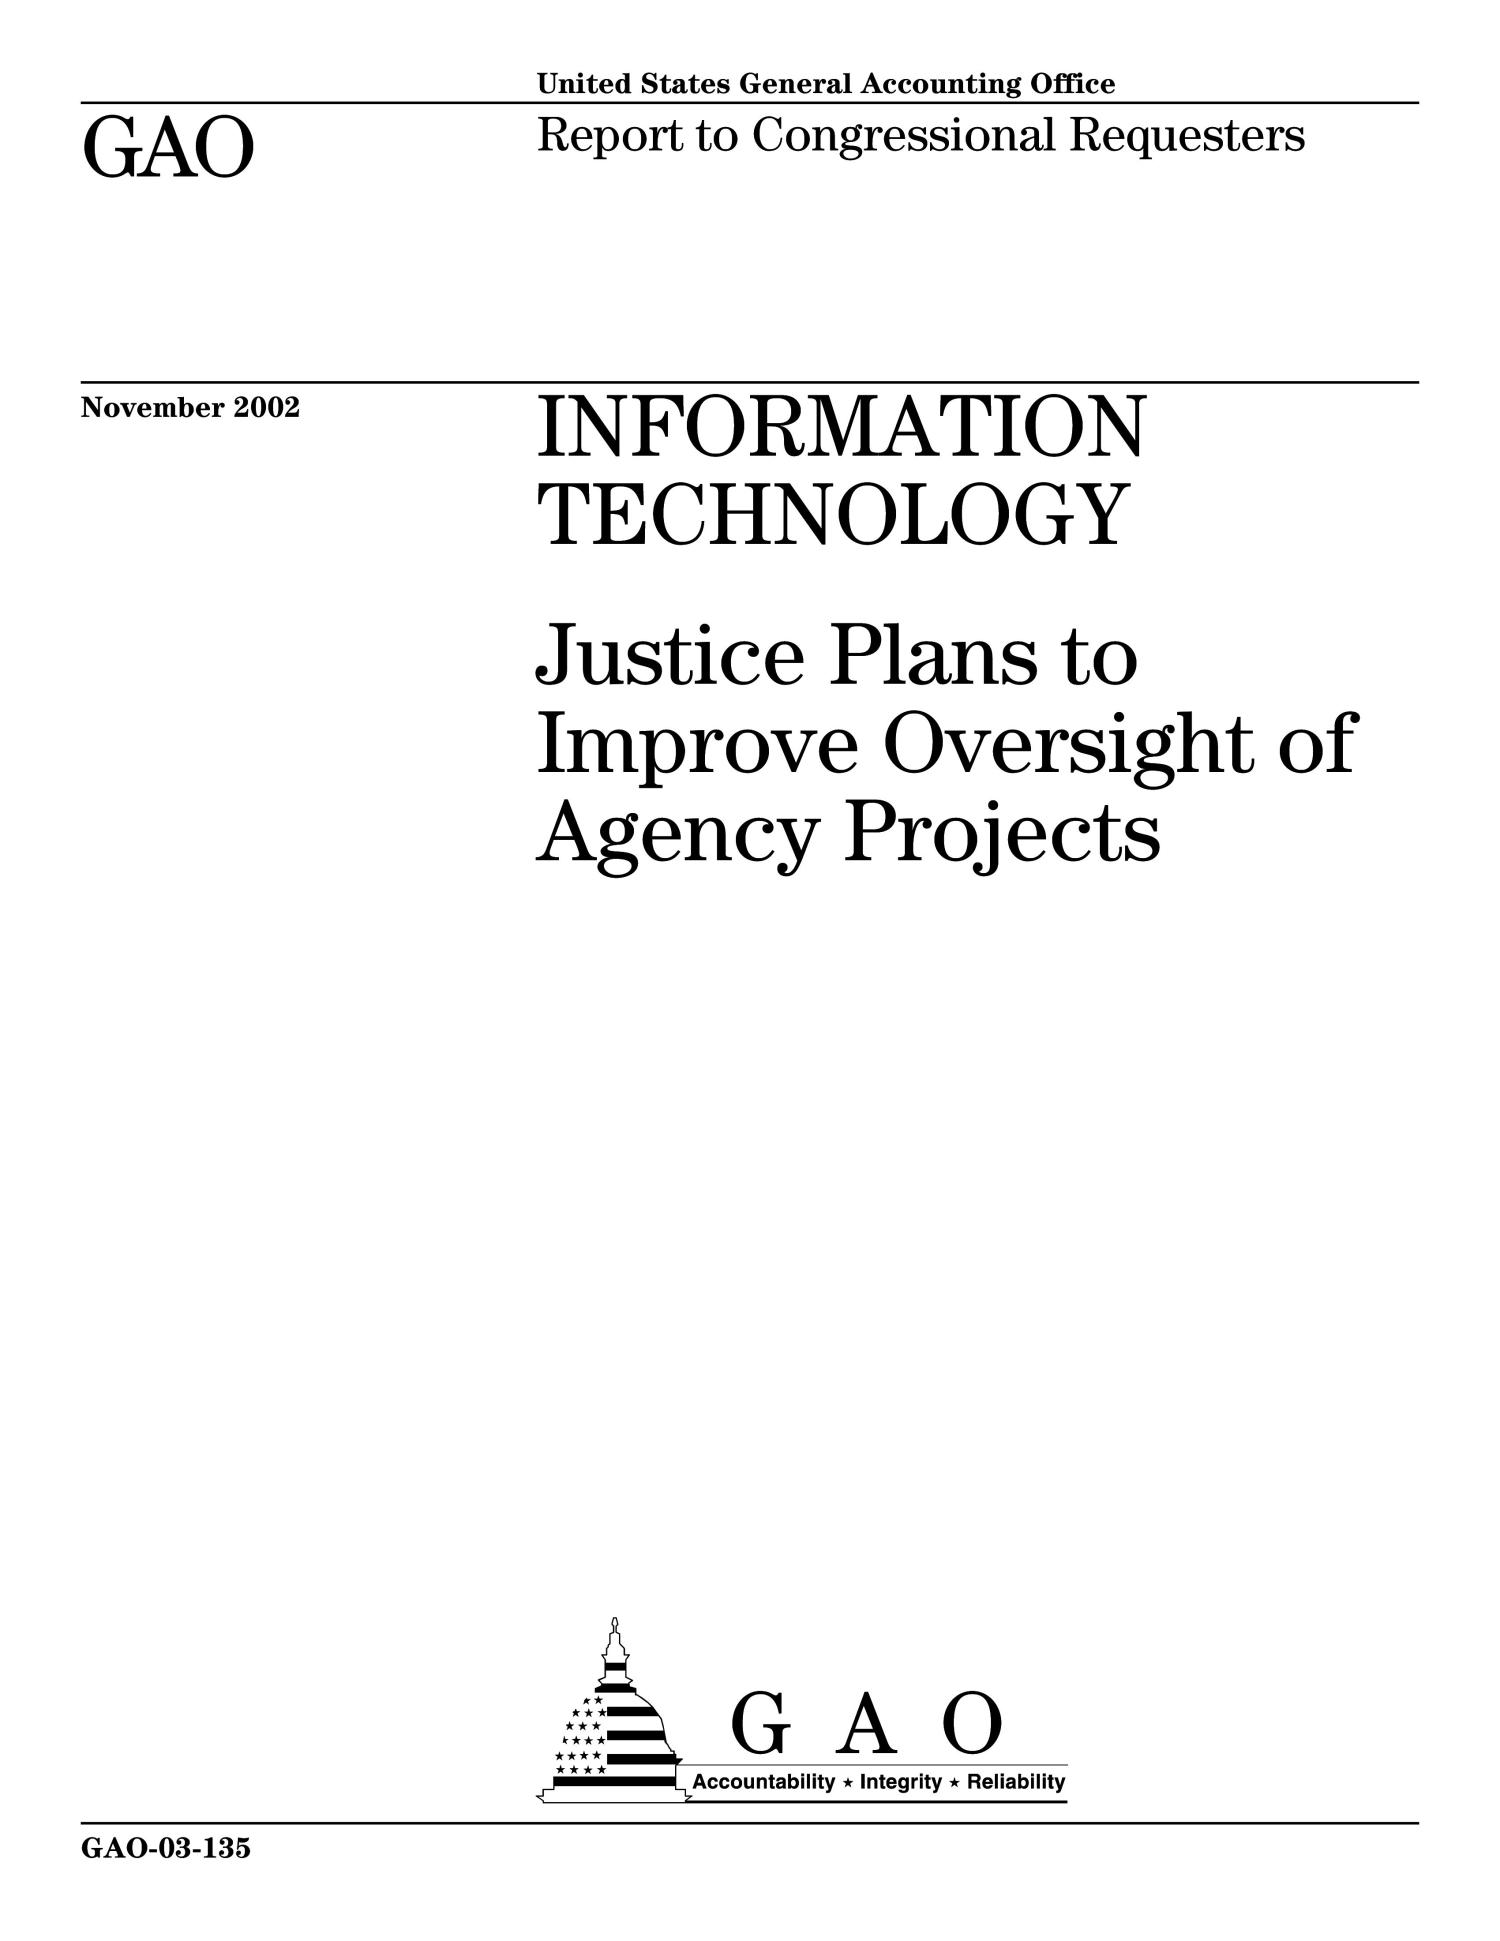 Information Technology: Justice Plans to Improve Oversight of Agency Projects
                                                
                                                    [Sequence #]: 1 of 41
                                                